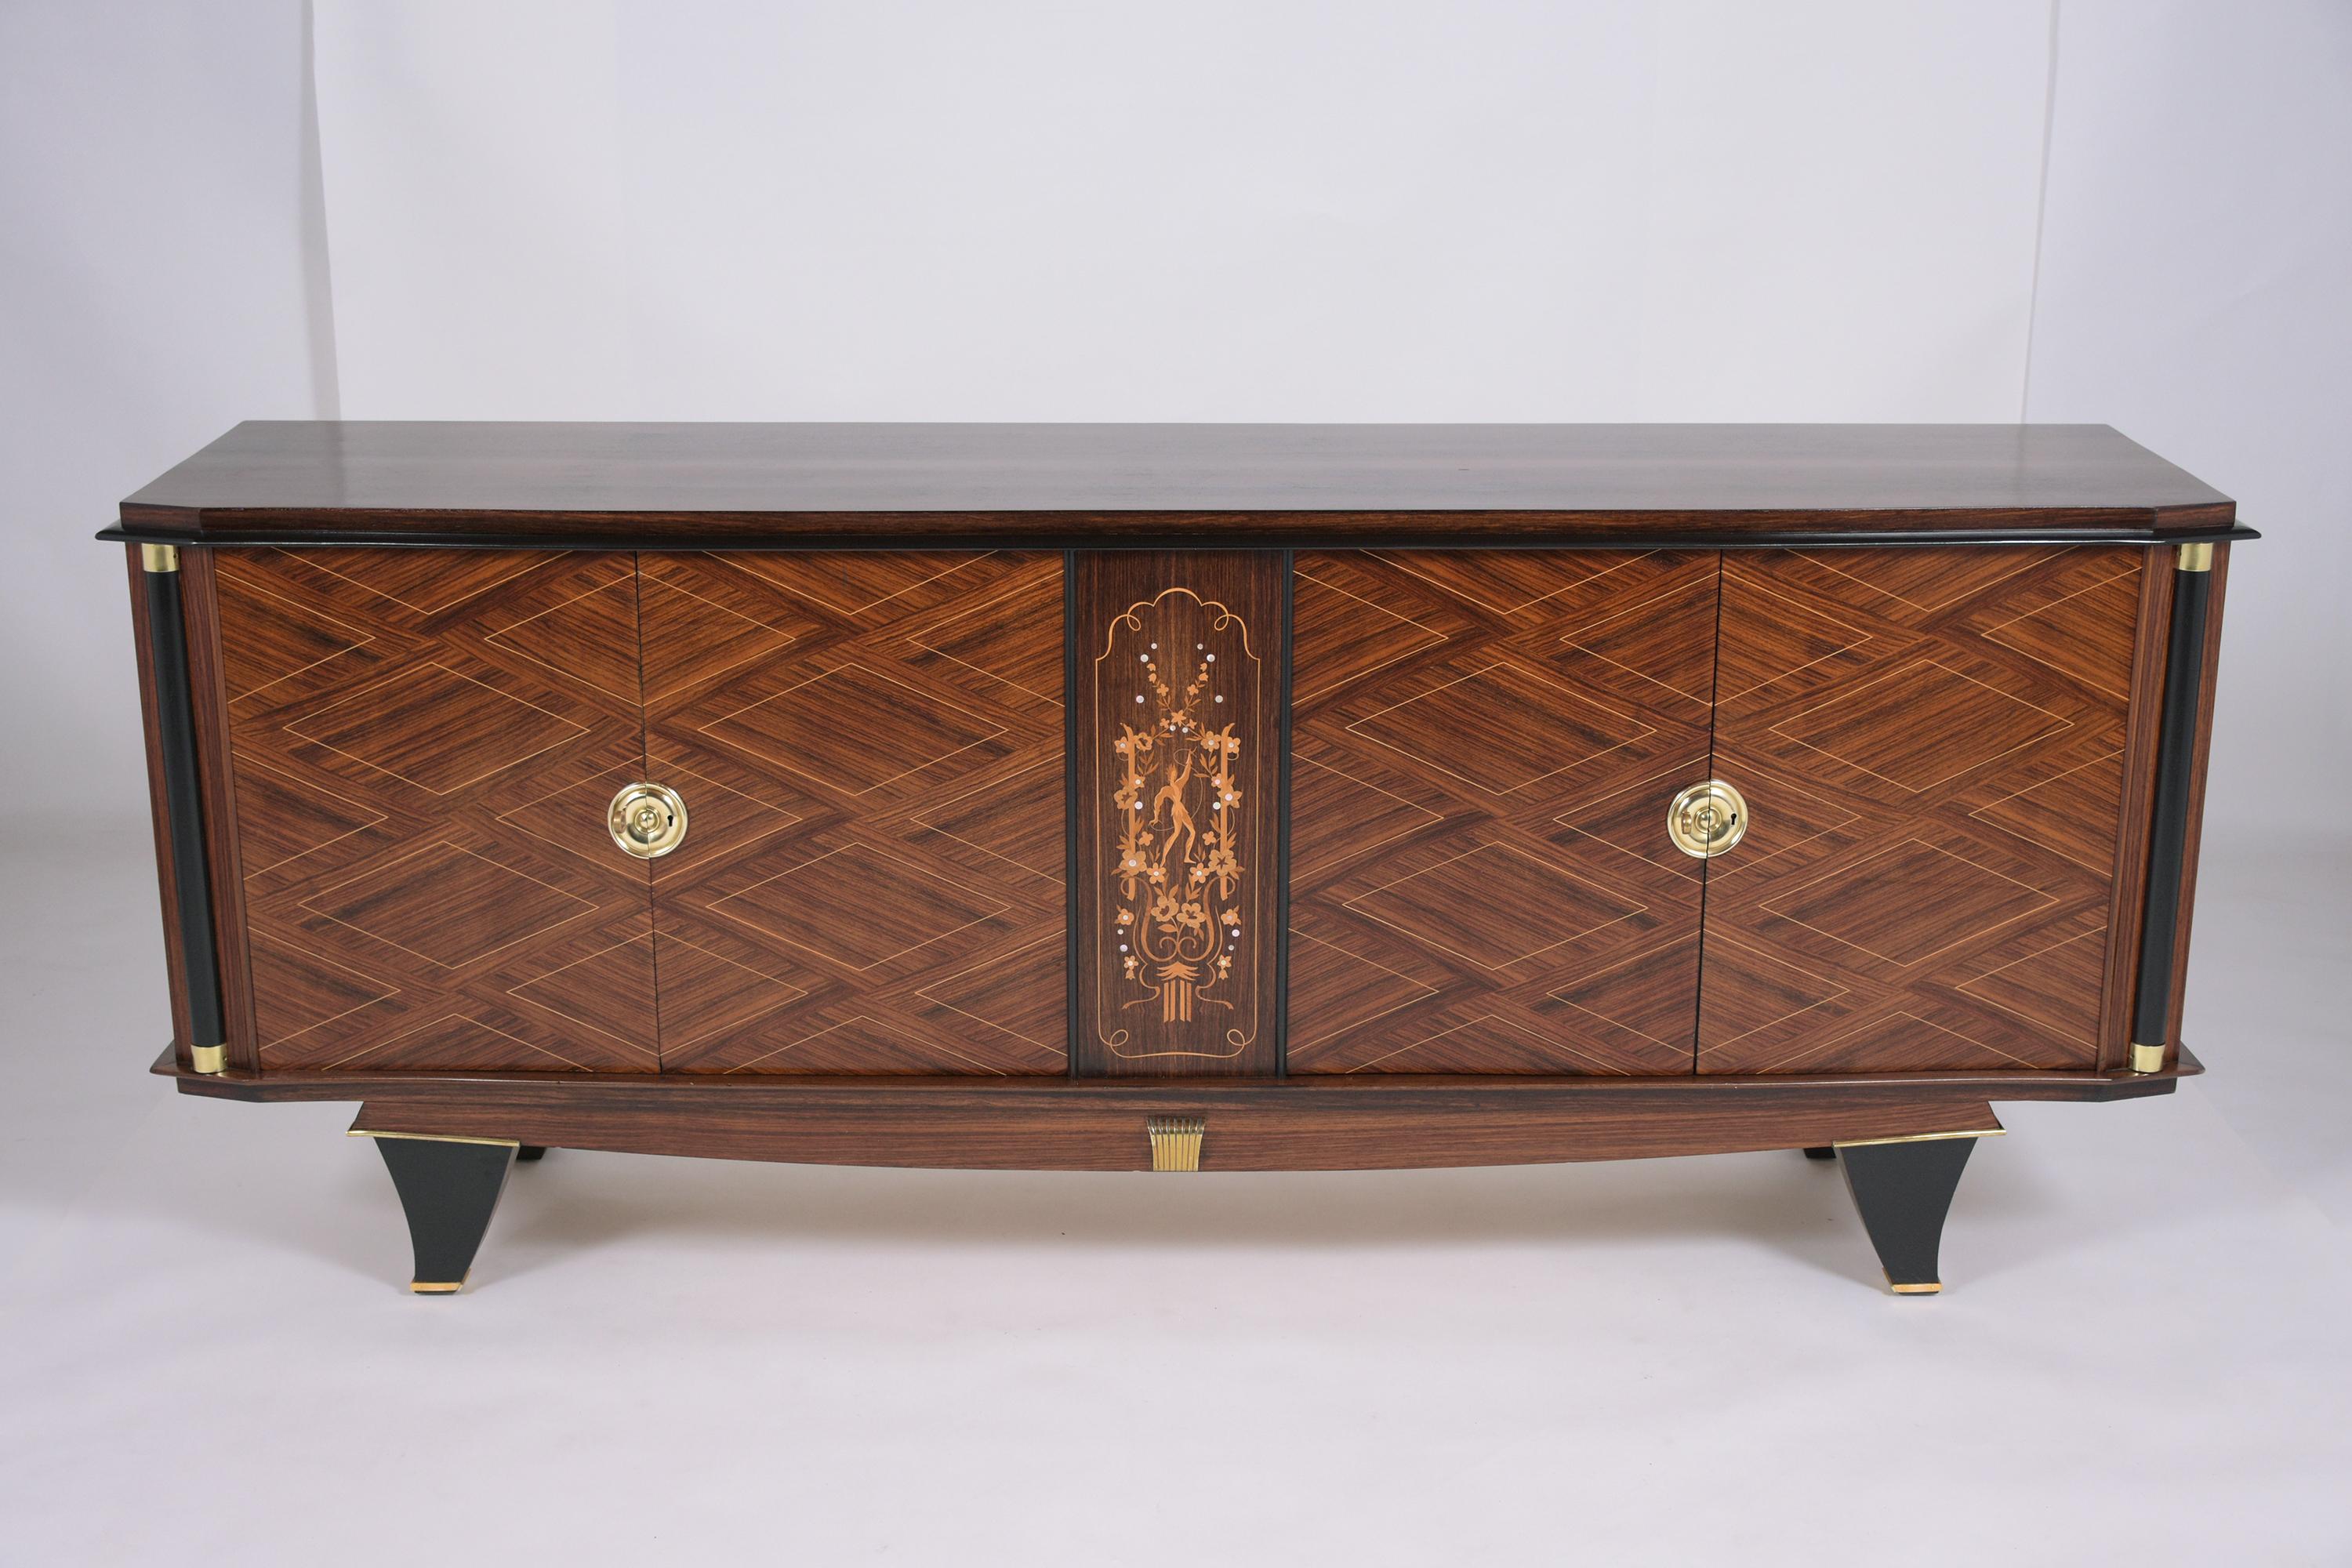 An extraordinary french art deco rosewood buffet beautifully crafted out of rosewood and has been professionally restored by our craftsmen team. This elegant sideboard features eye-catching mahogany and ebonized color combination with lacquered